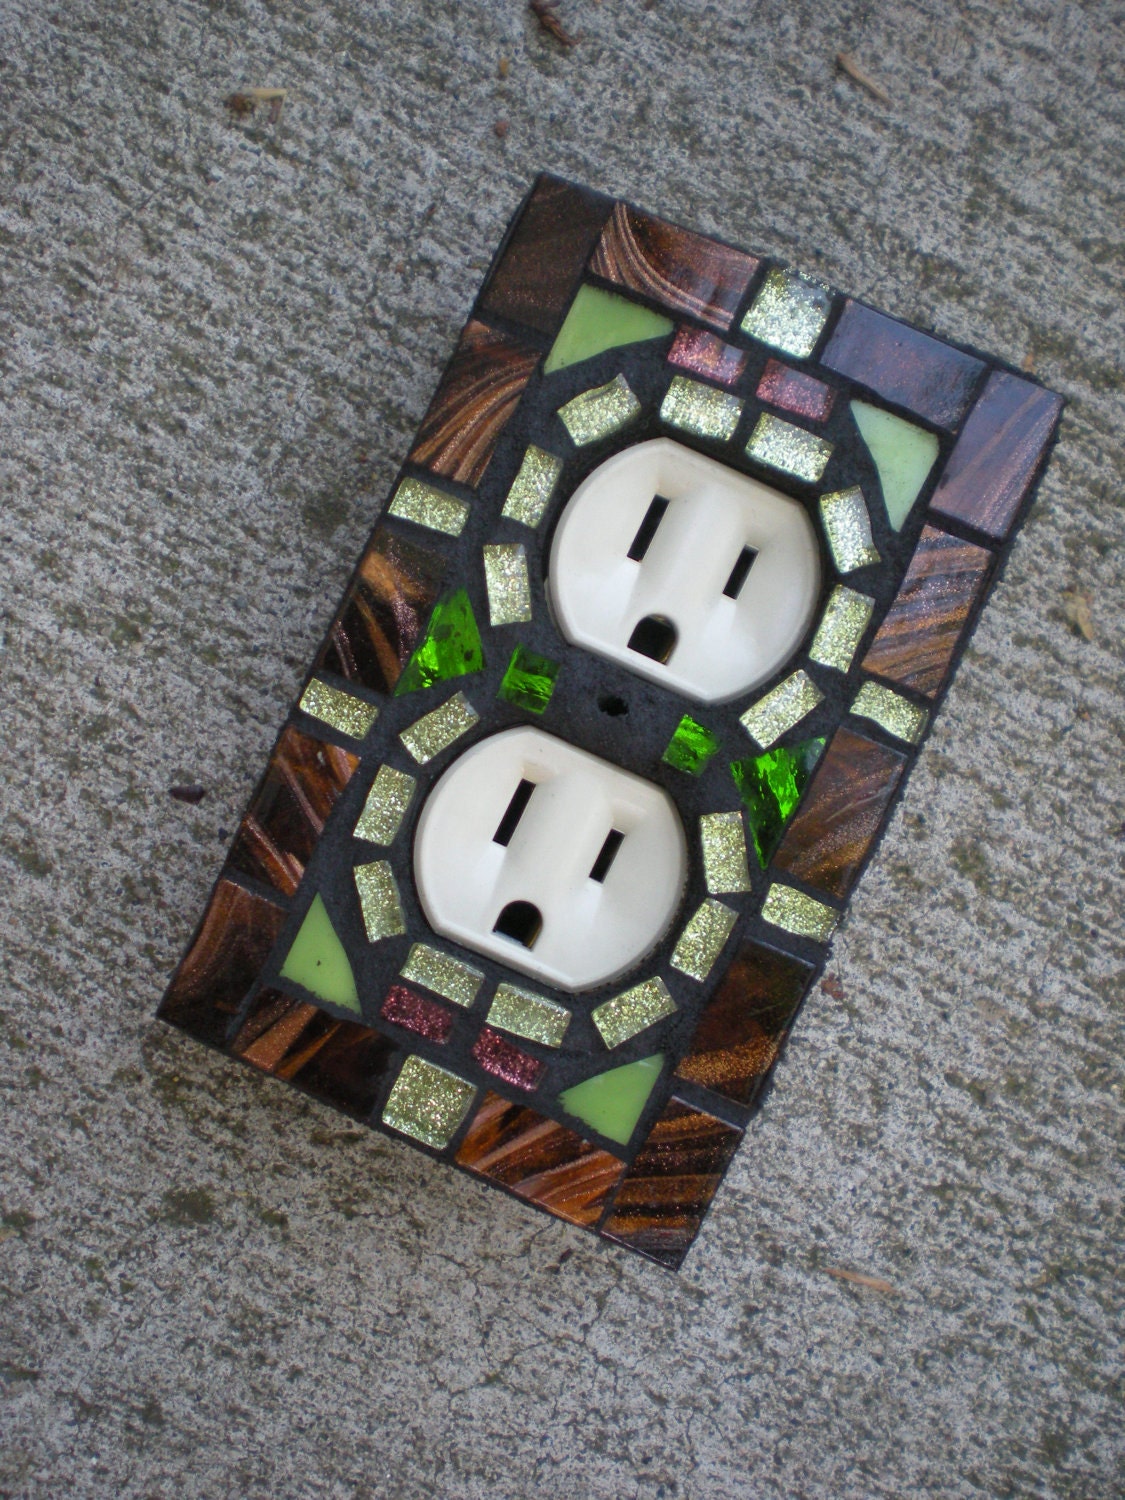 Bronze Outlet Covers